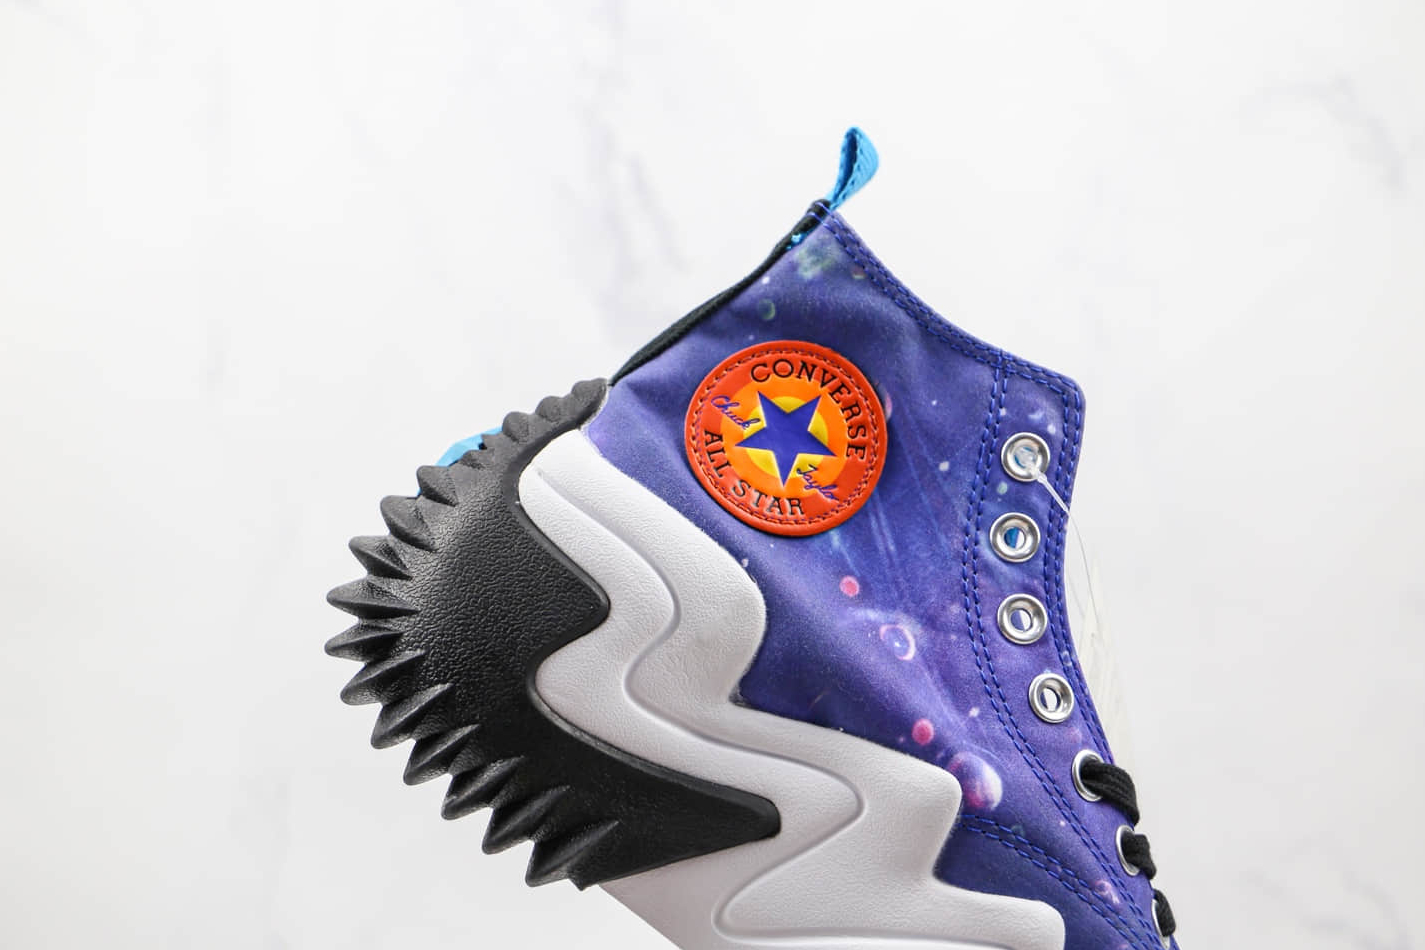 Converse Space Jam x Run Star Motion 'A New Legacy' 172488C - Stylish and Iconic Sneakers!